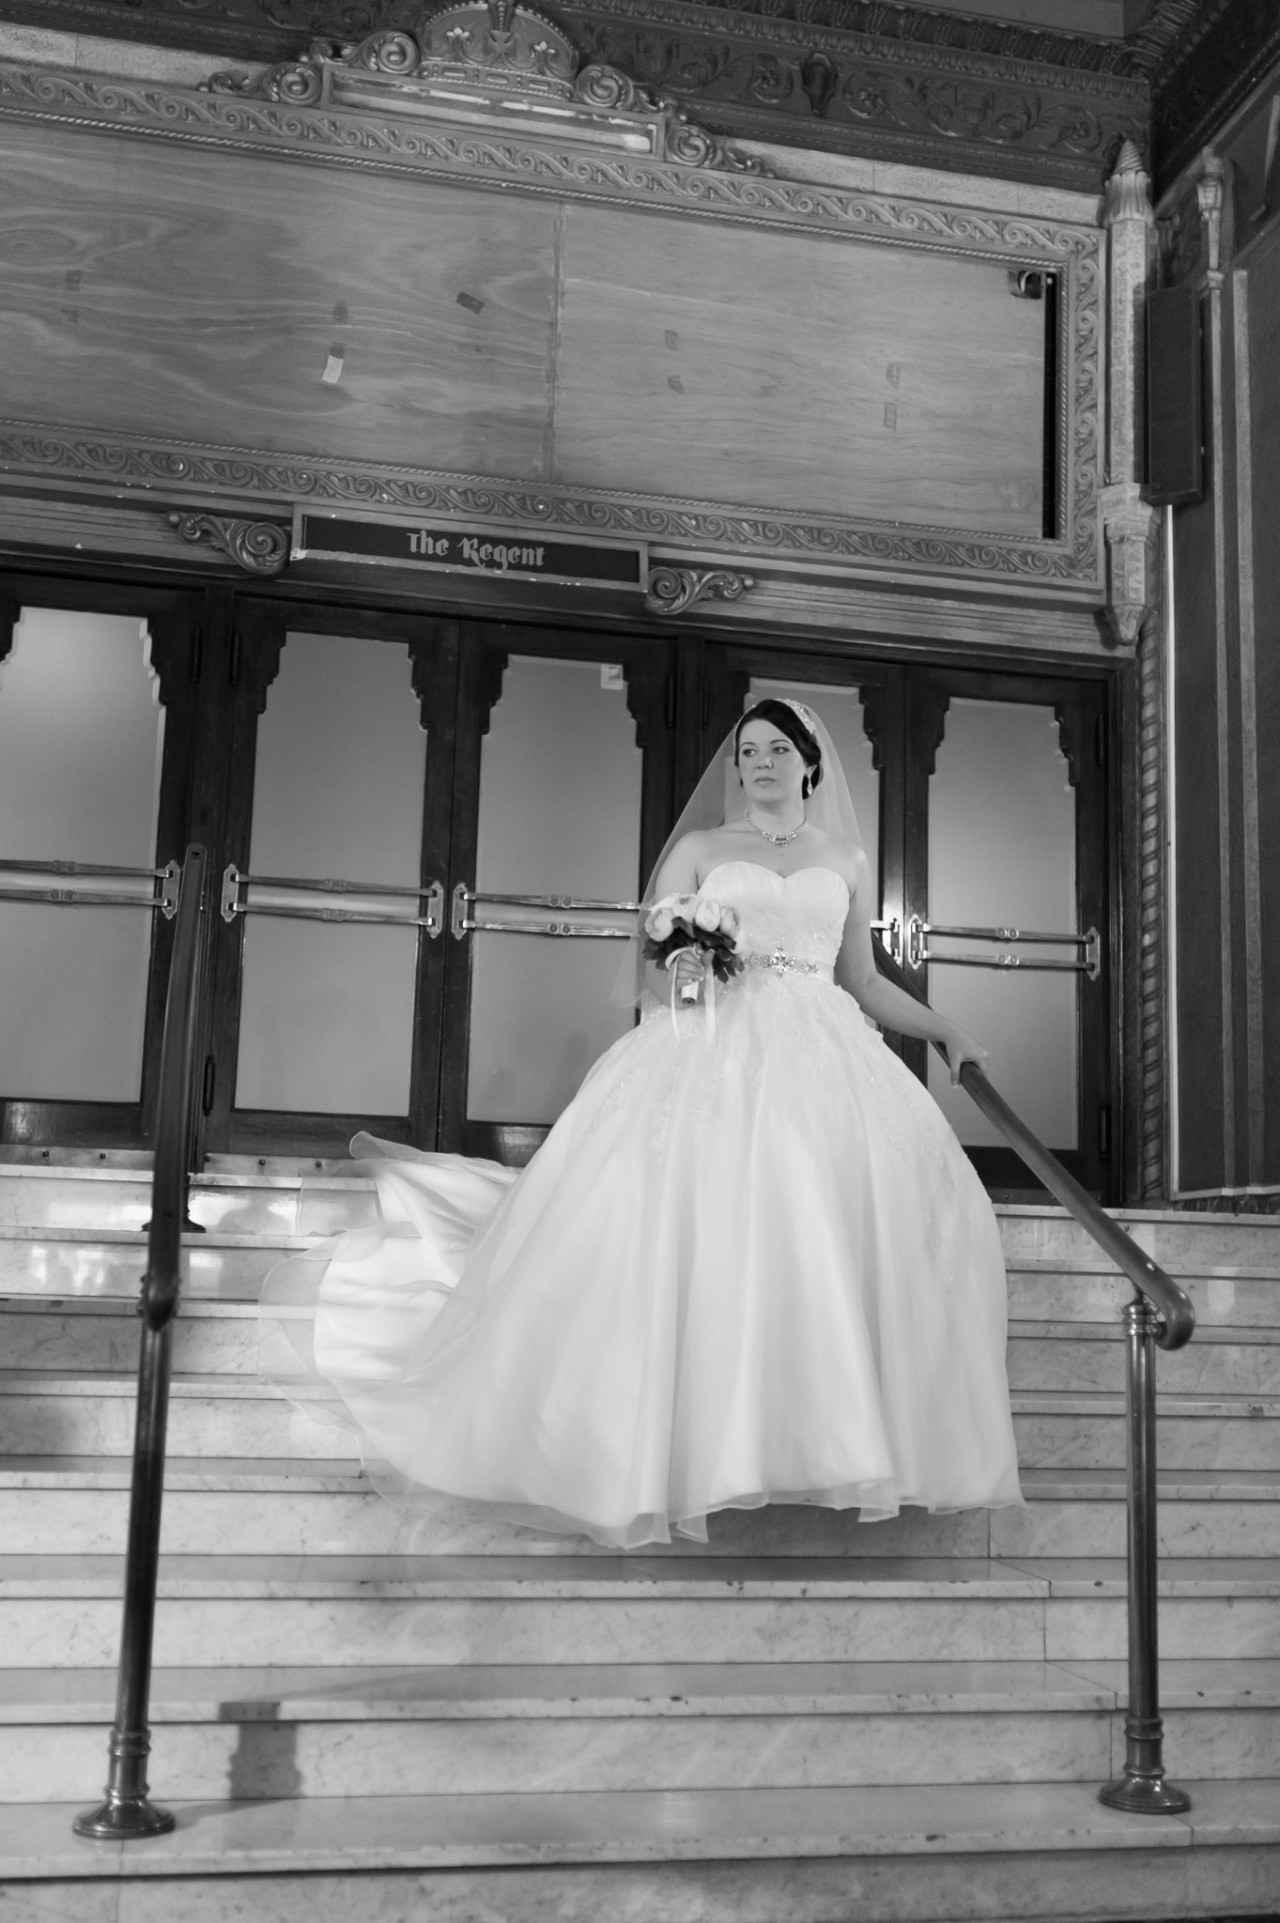 Melissa the bride walking down the stair in the Regents Theatre